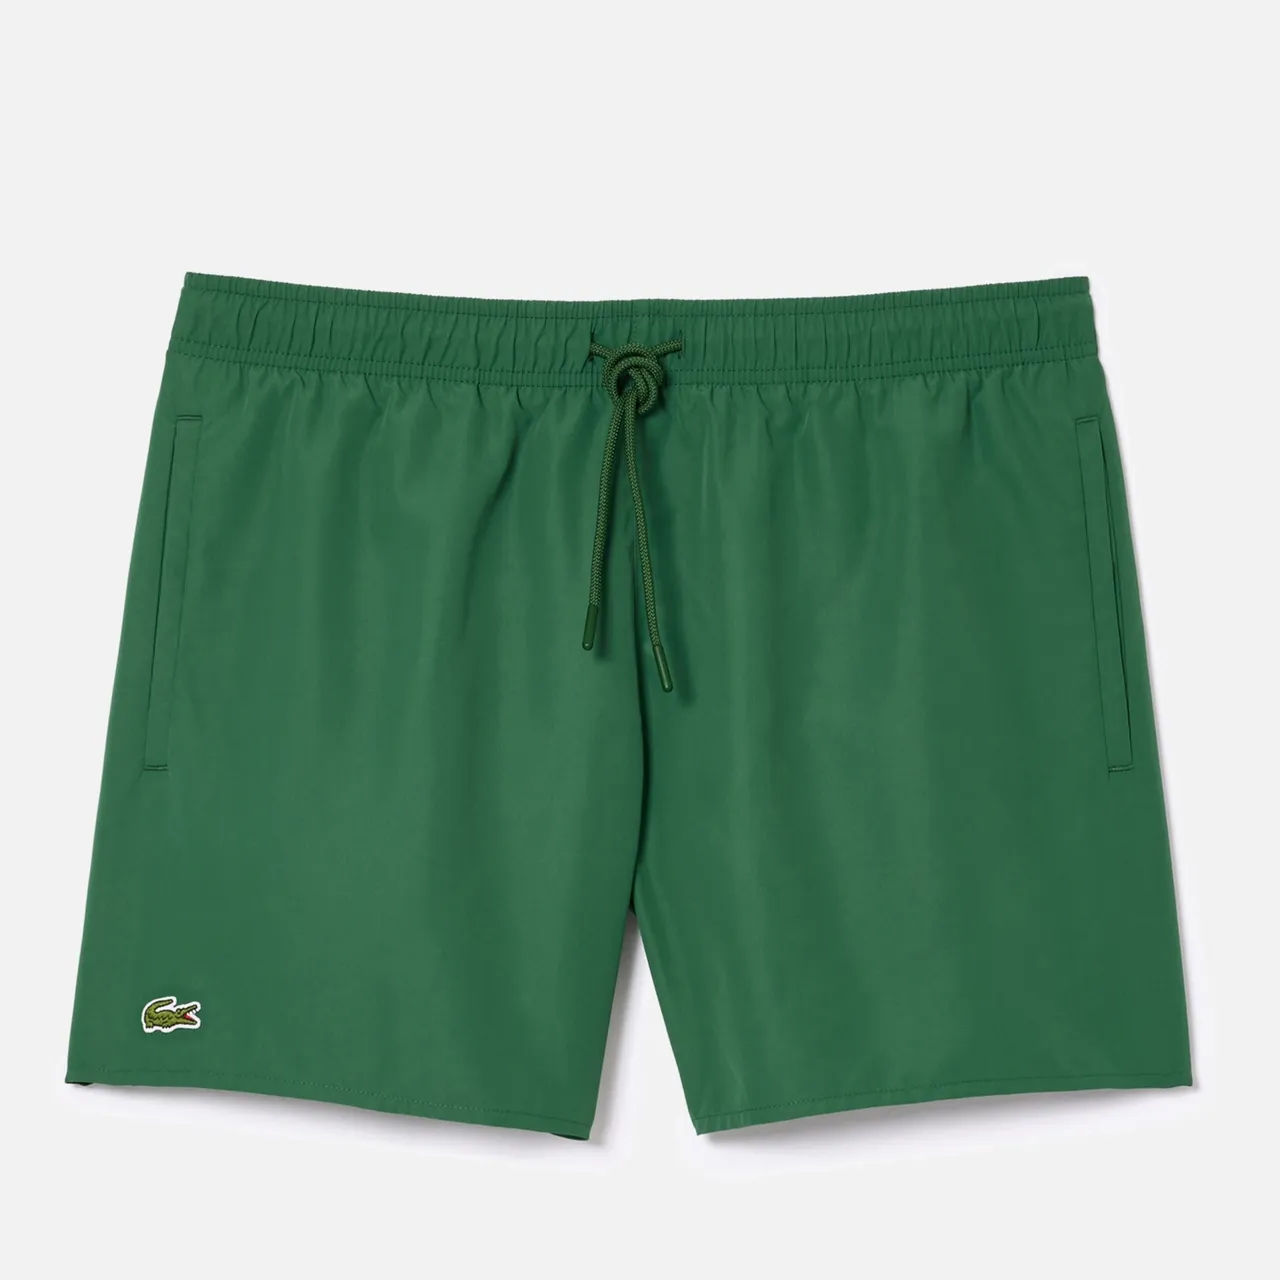 Lacoste Shell Swimming Trunks